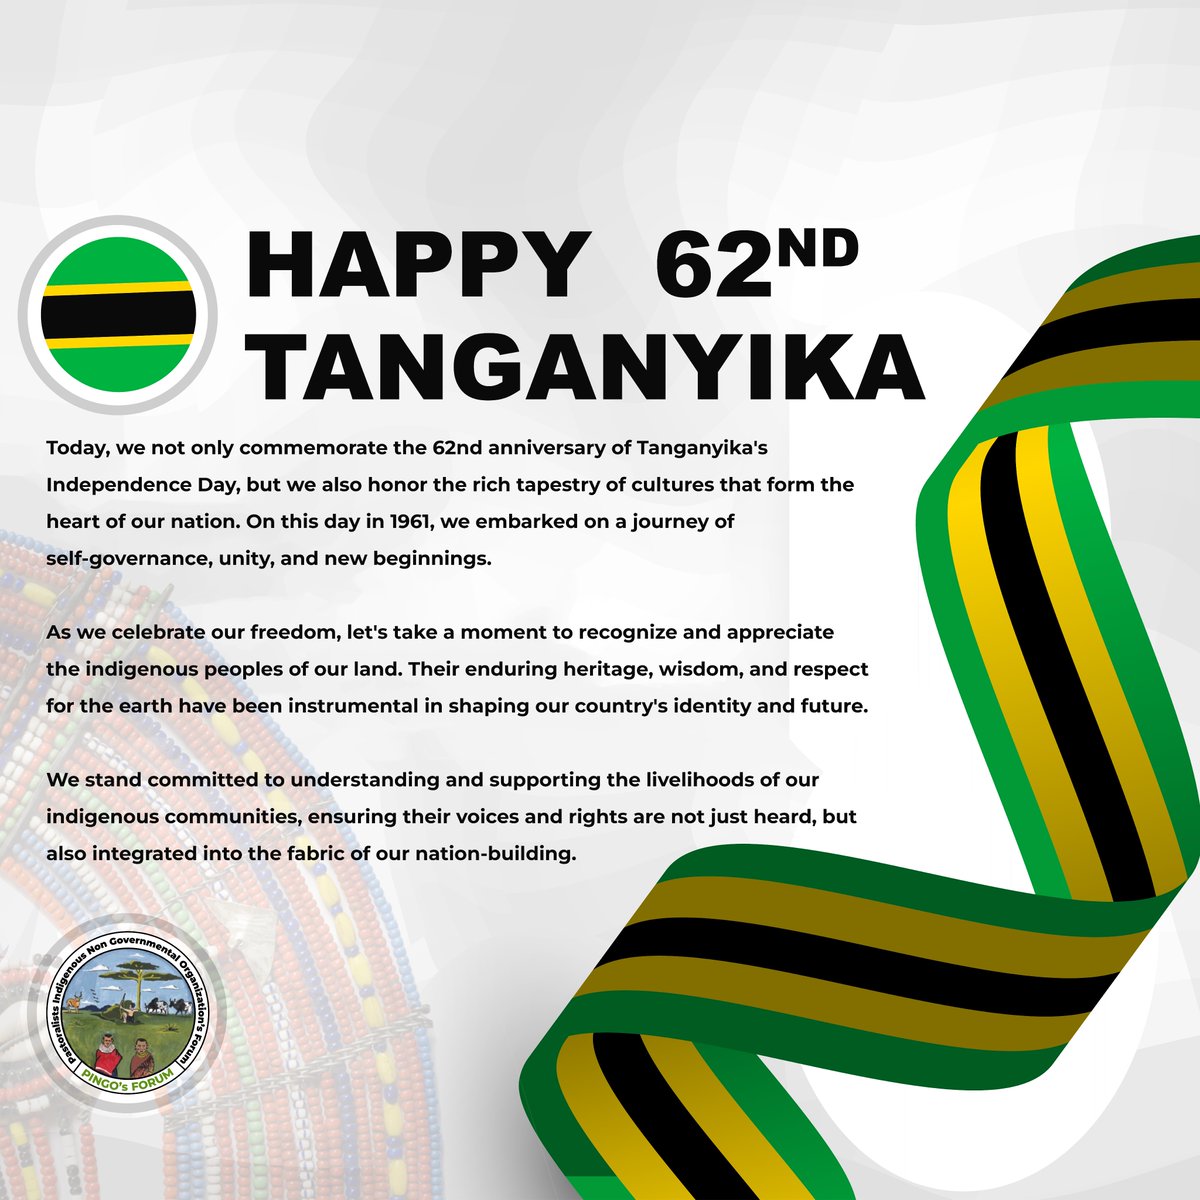 As we celebrate our freedom, let's recognize & appreciate the indigenous peoples of our land. Their enduring heritage, wisdom, and respect for the earth have been instrumental in shaping our country's identity and future. #Tanganyika #IndigenousUnity #Uhuru #Culture #Diversity